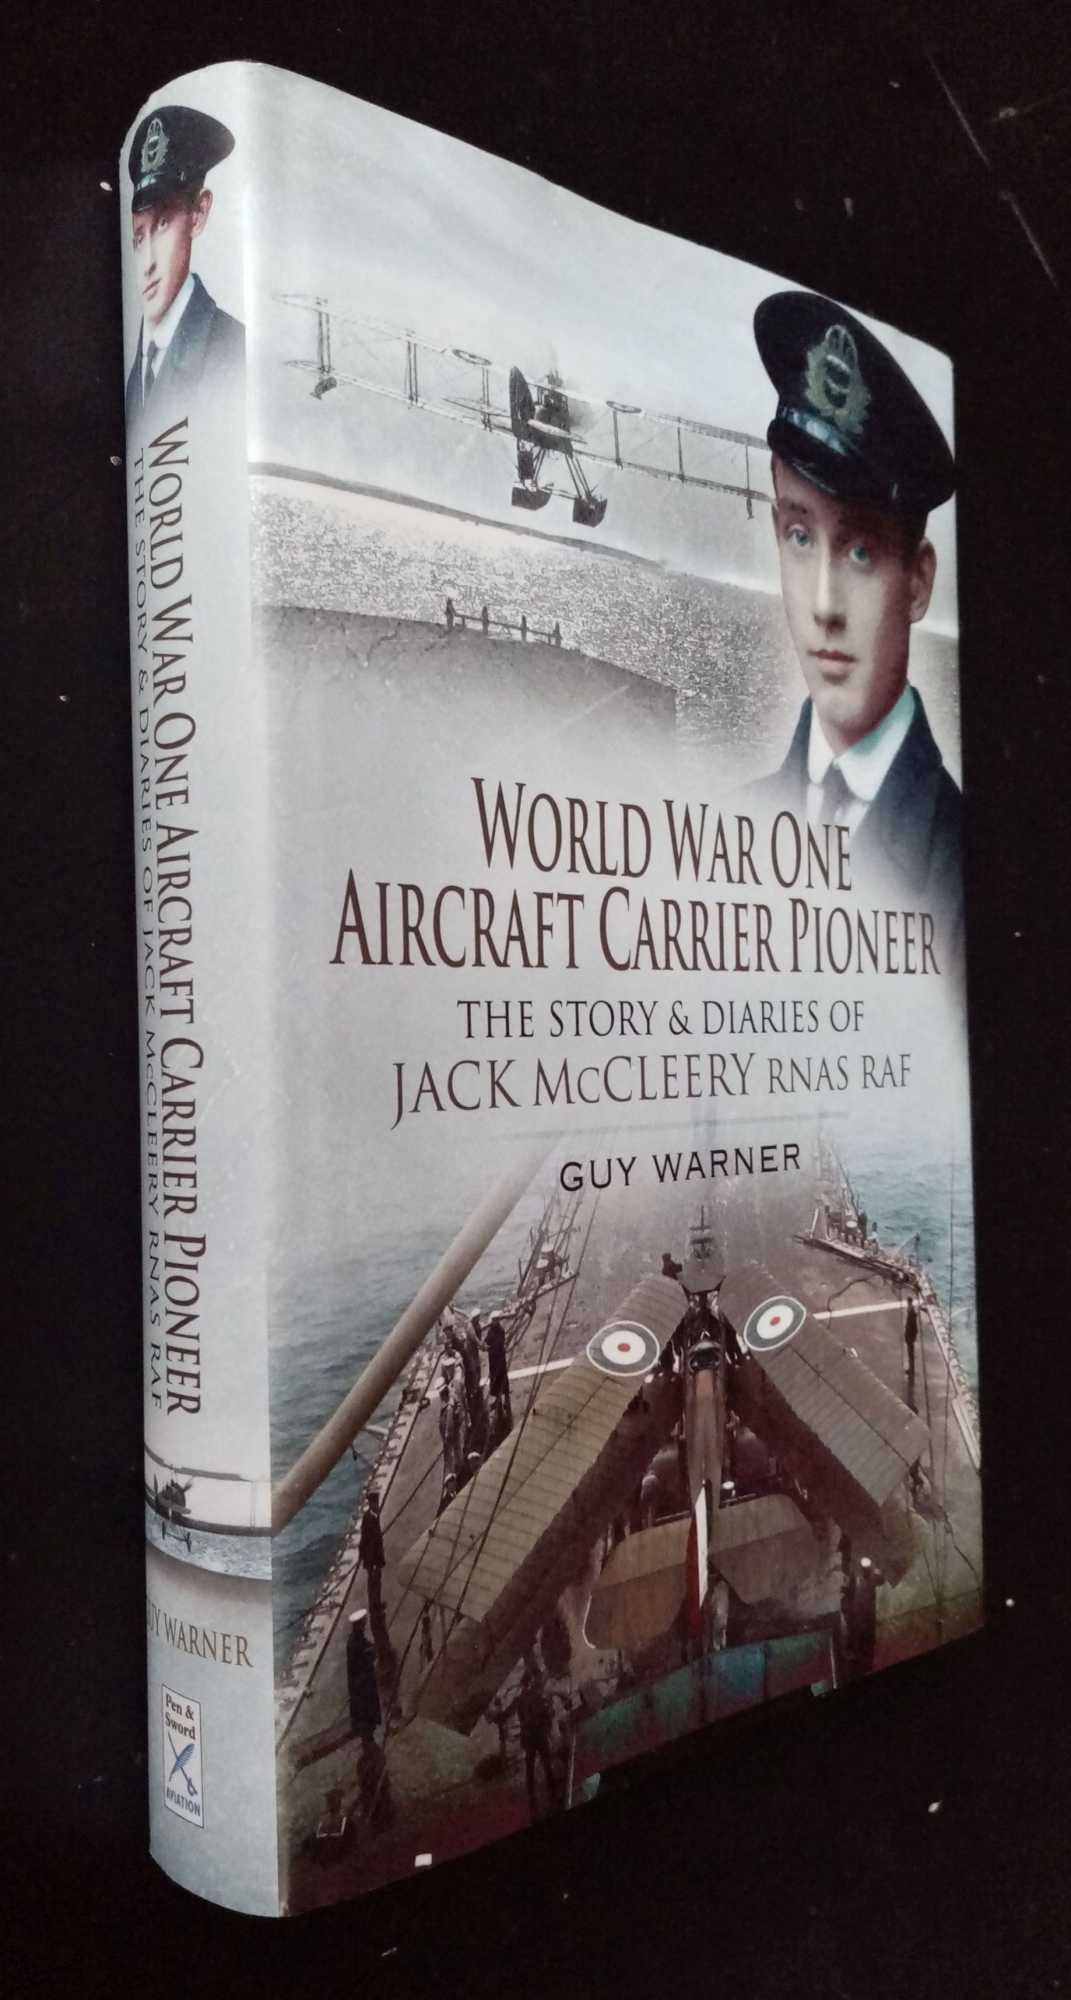 Guy Warner - World War One Aircraft Carrier Pioneer: The Story and Diaries of Captain JM McCleery RNAS/RAF